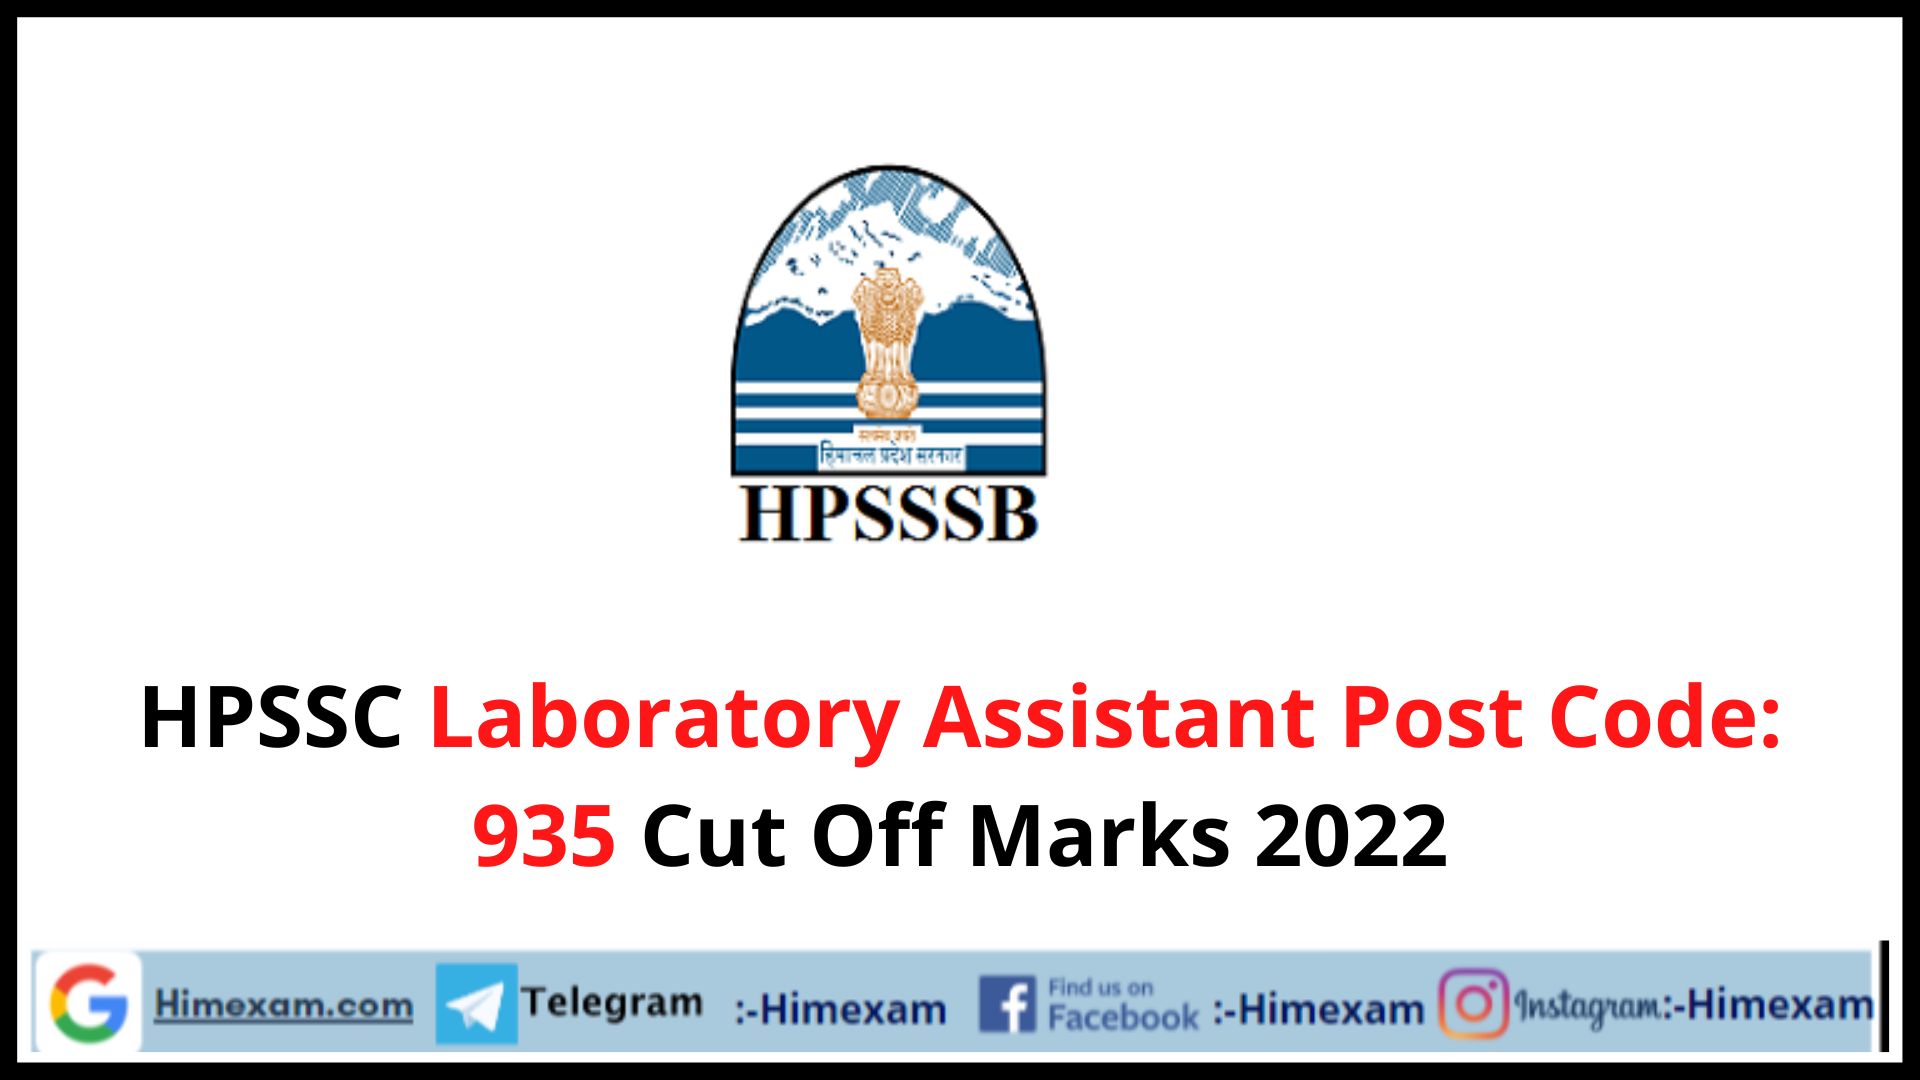 HPSSC Laboratory Assistant Post Code: 935 Cut Off Marks 2022